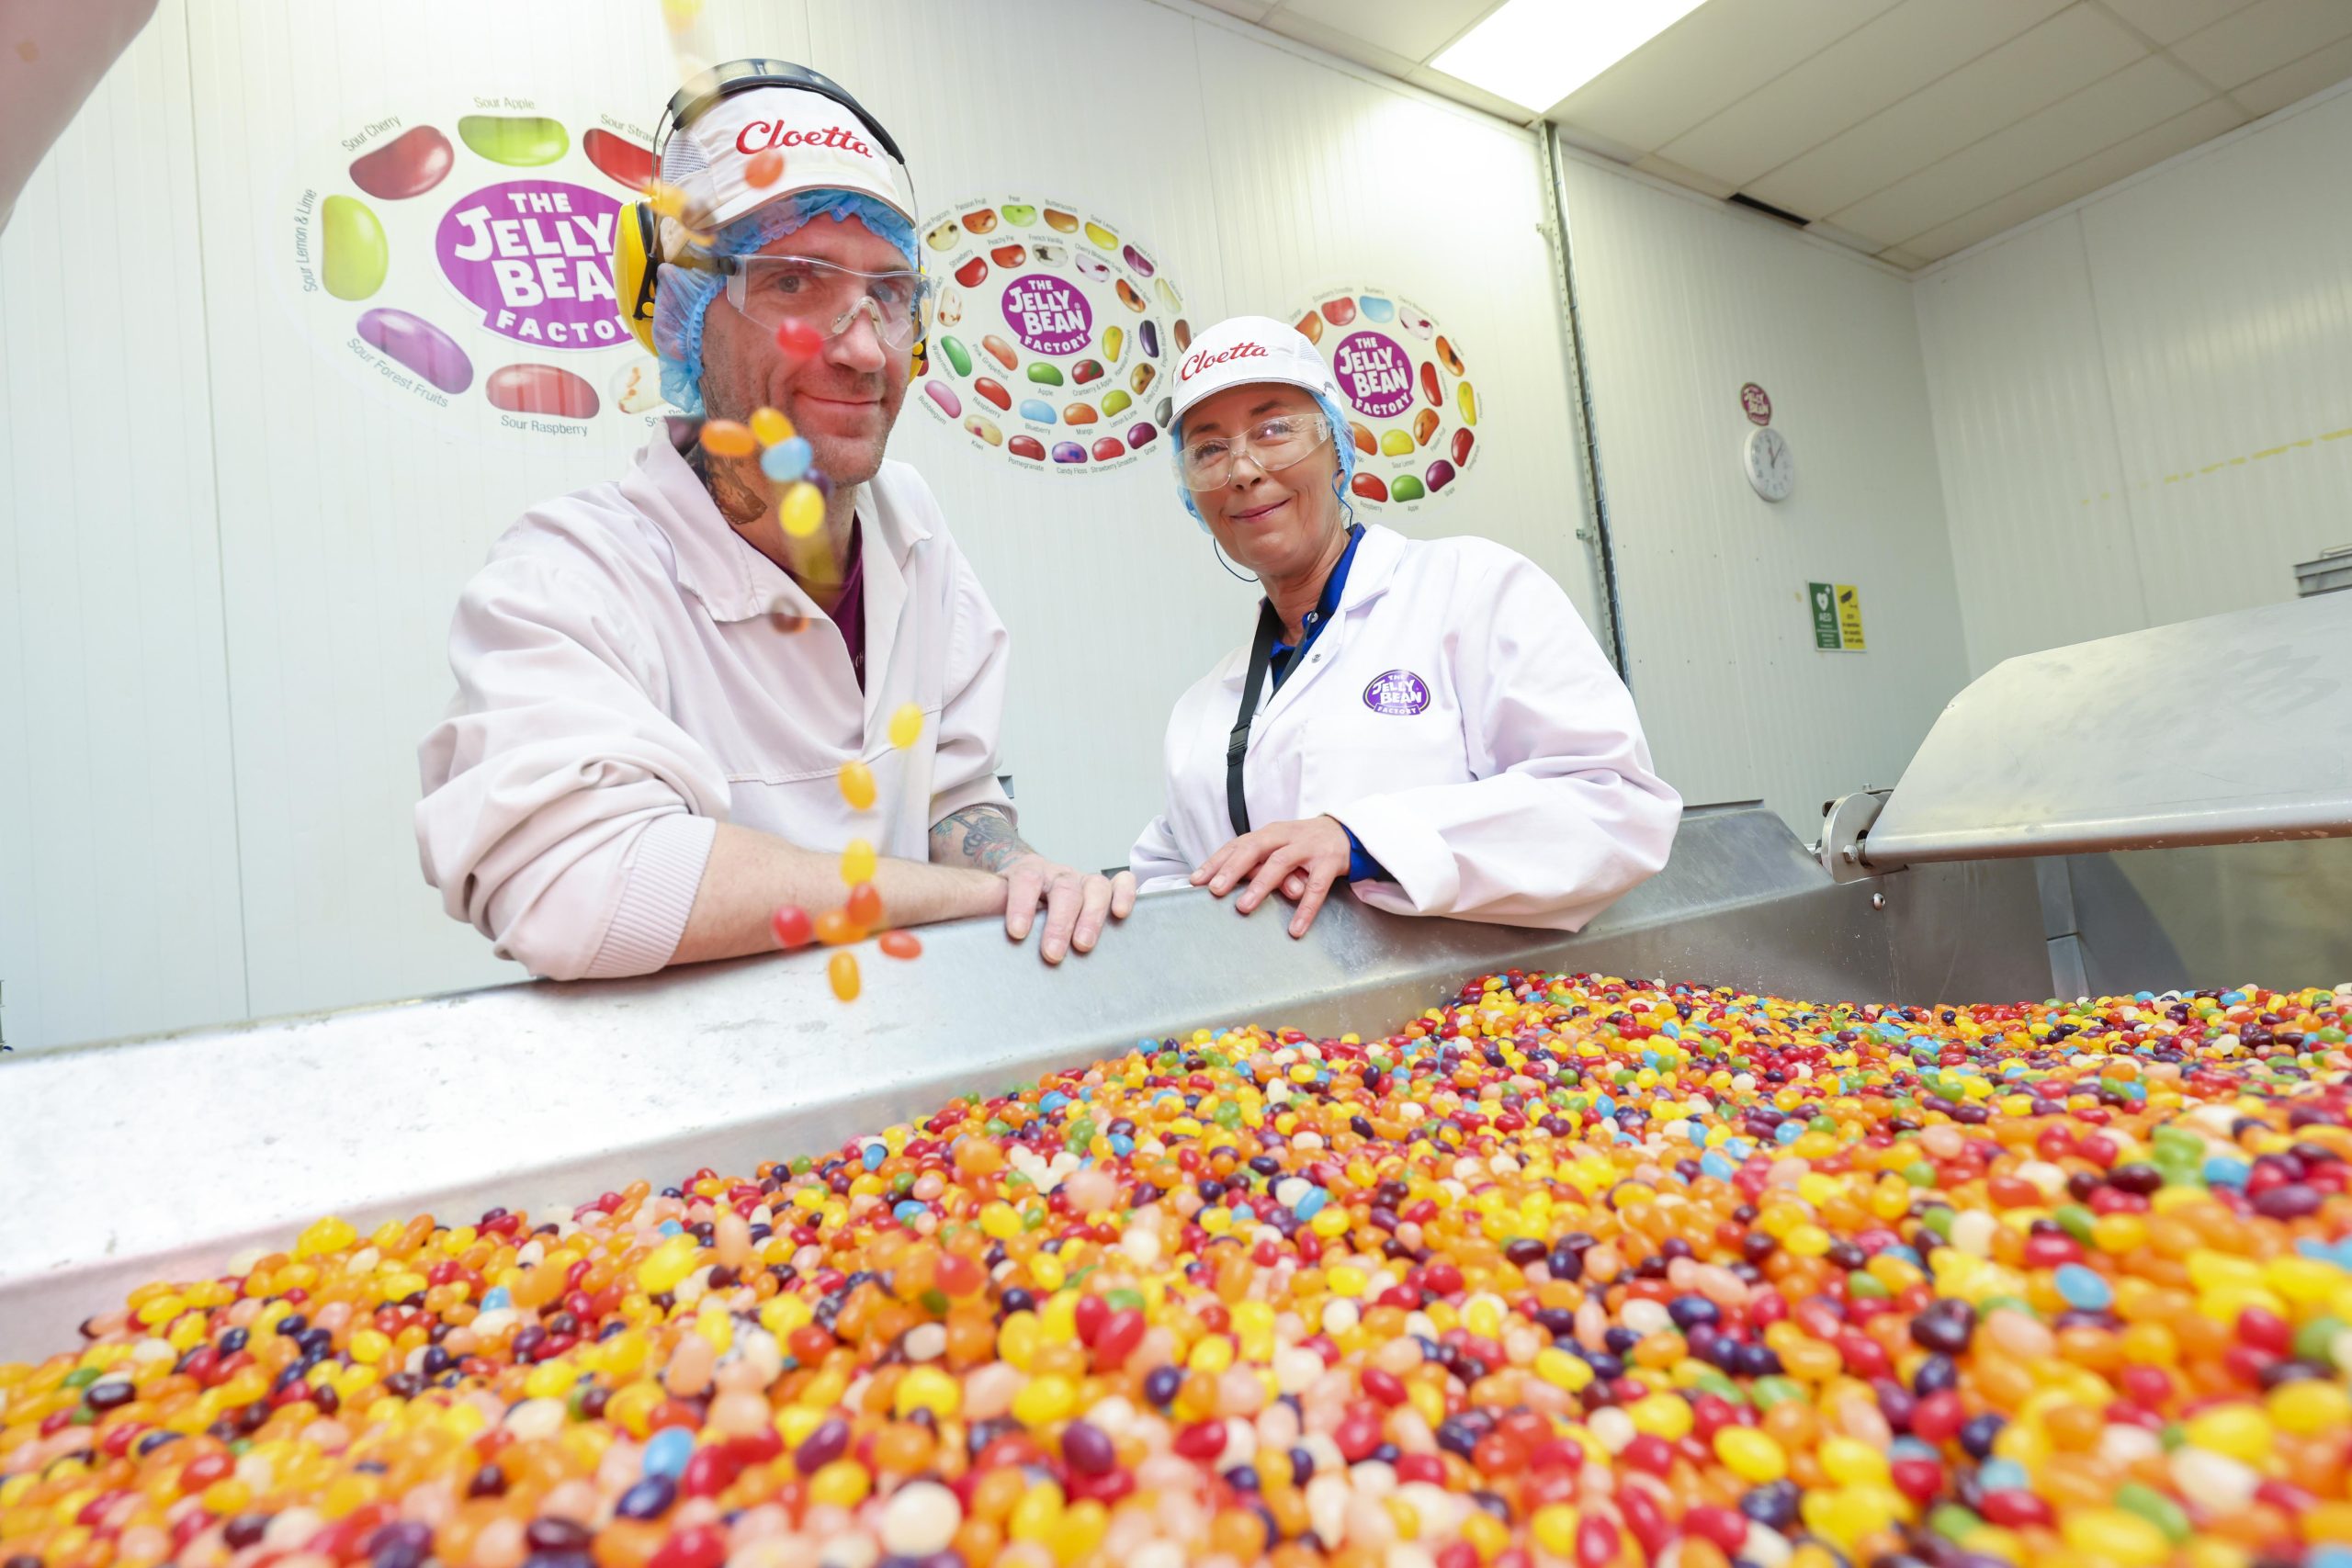 The sweet taste of success: 25 years of The Jelly Bean Factory®